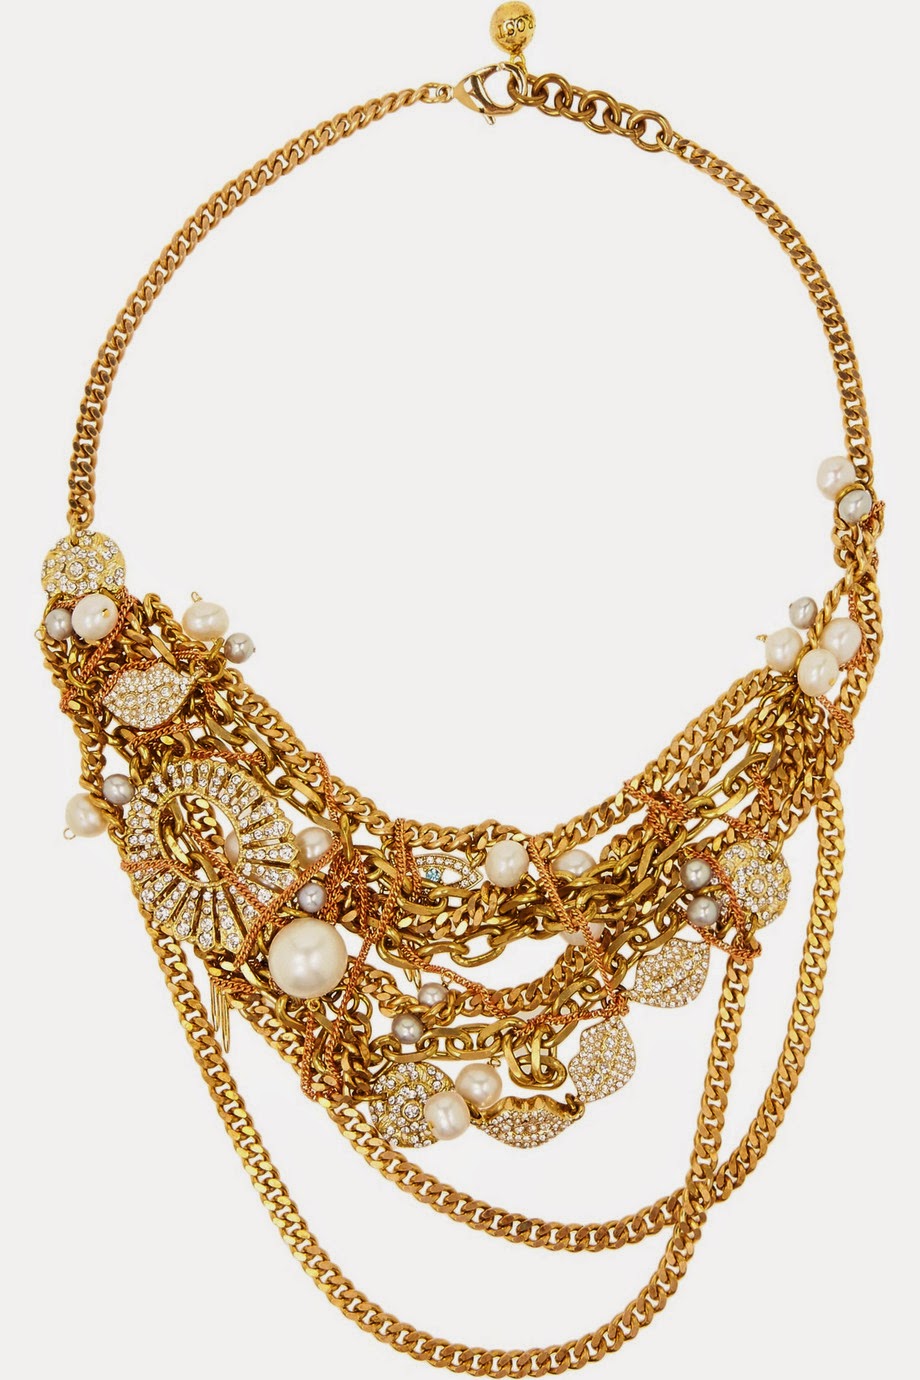 Bord La Mer gold-plated, crystal and freshwater pearl necklace ...